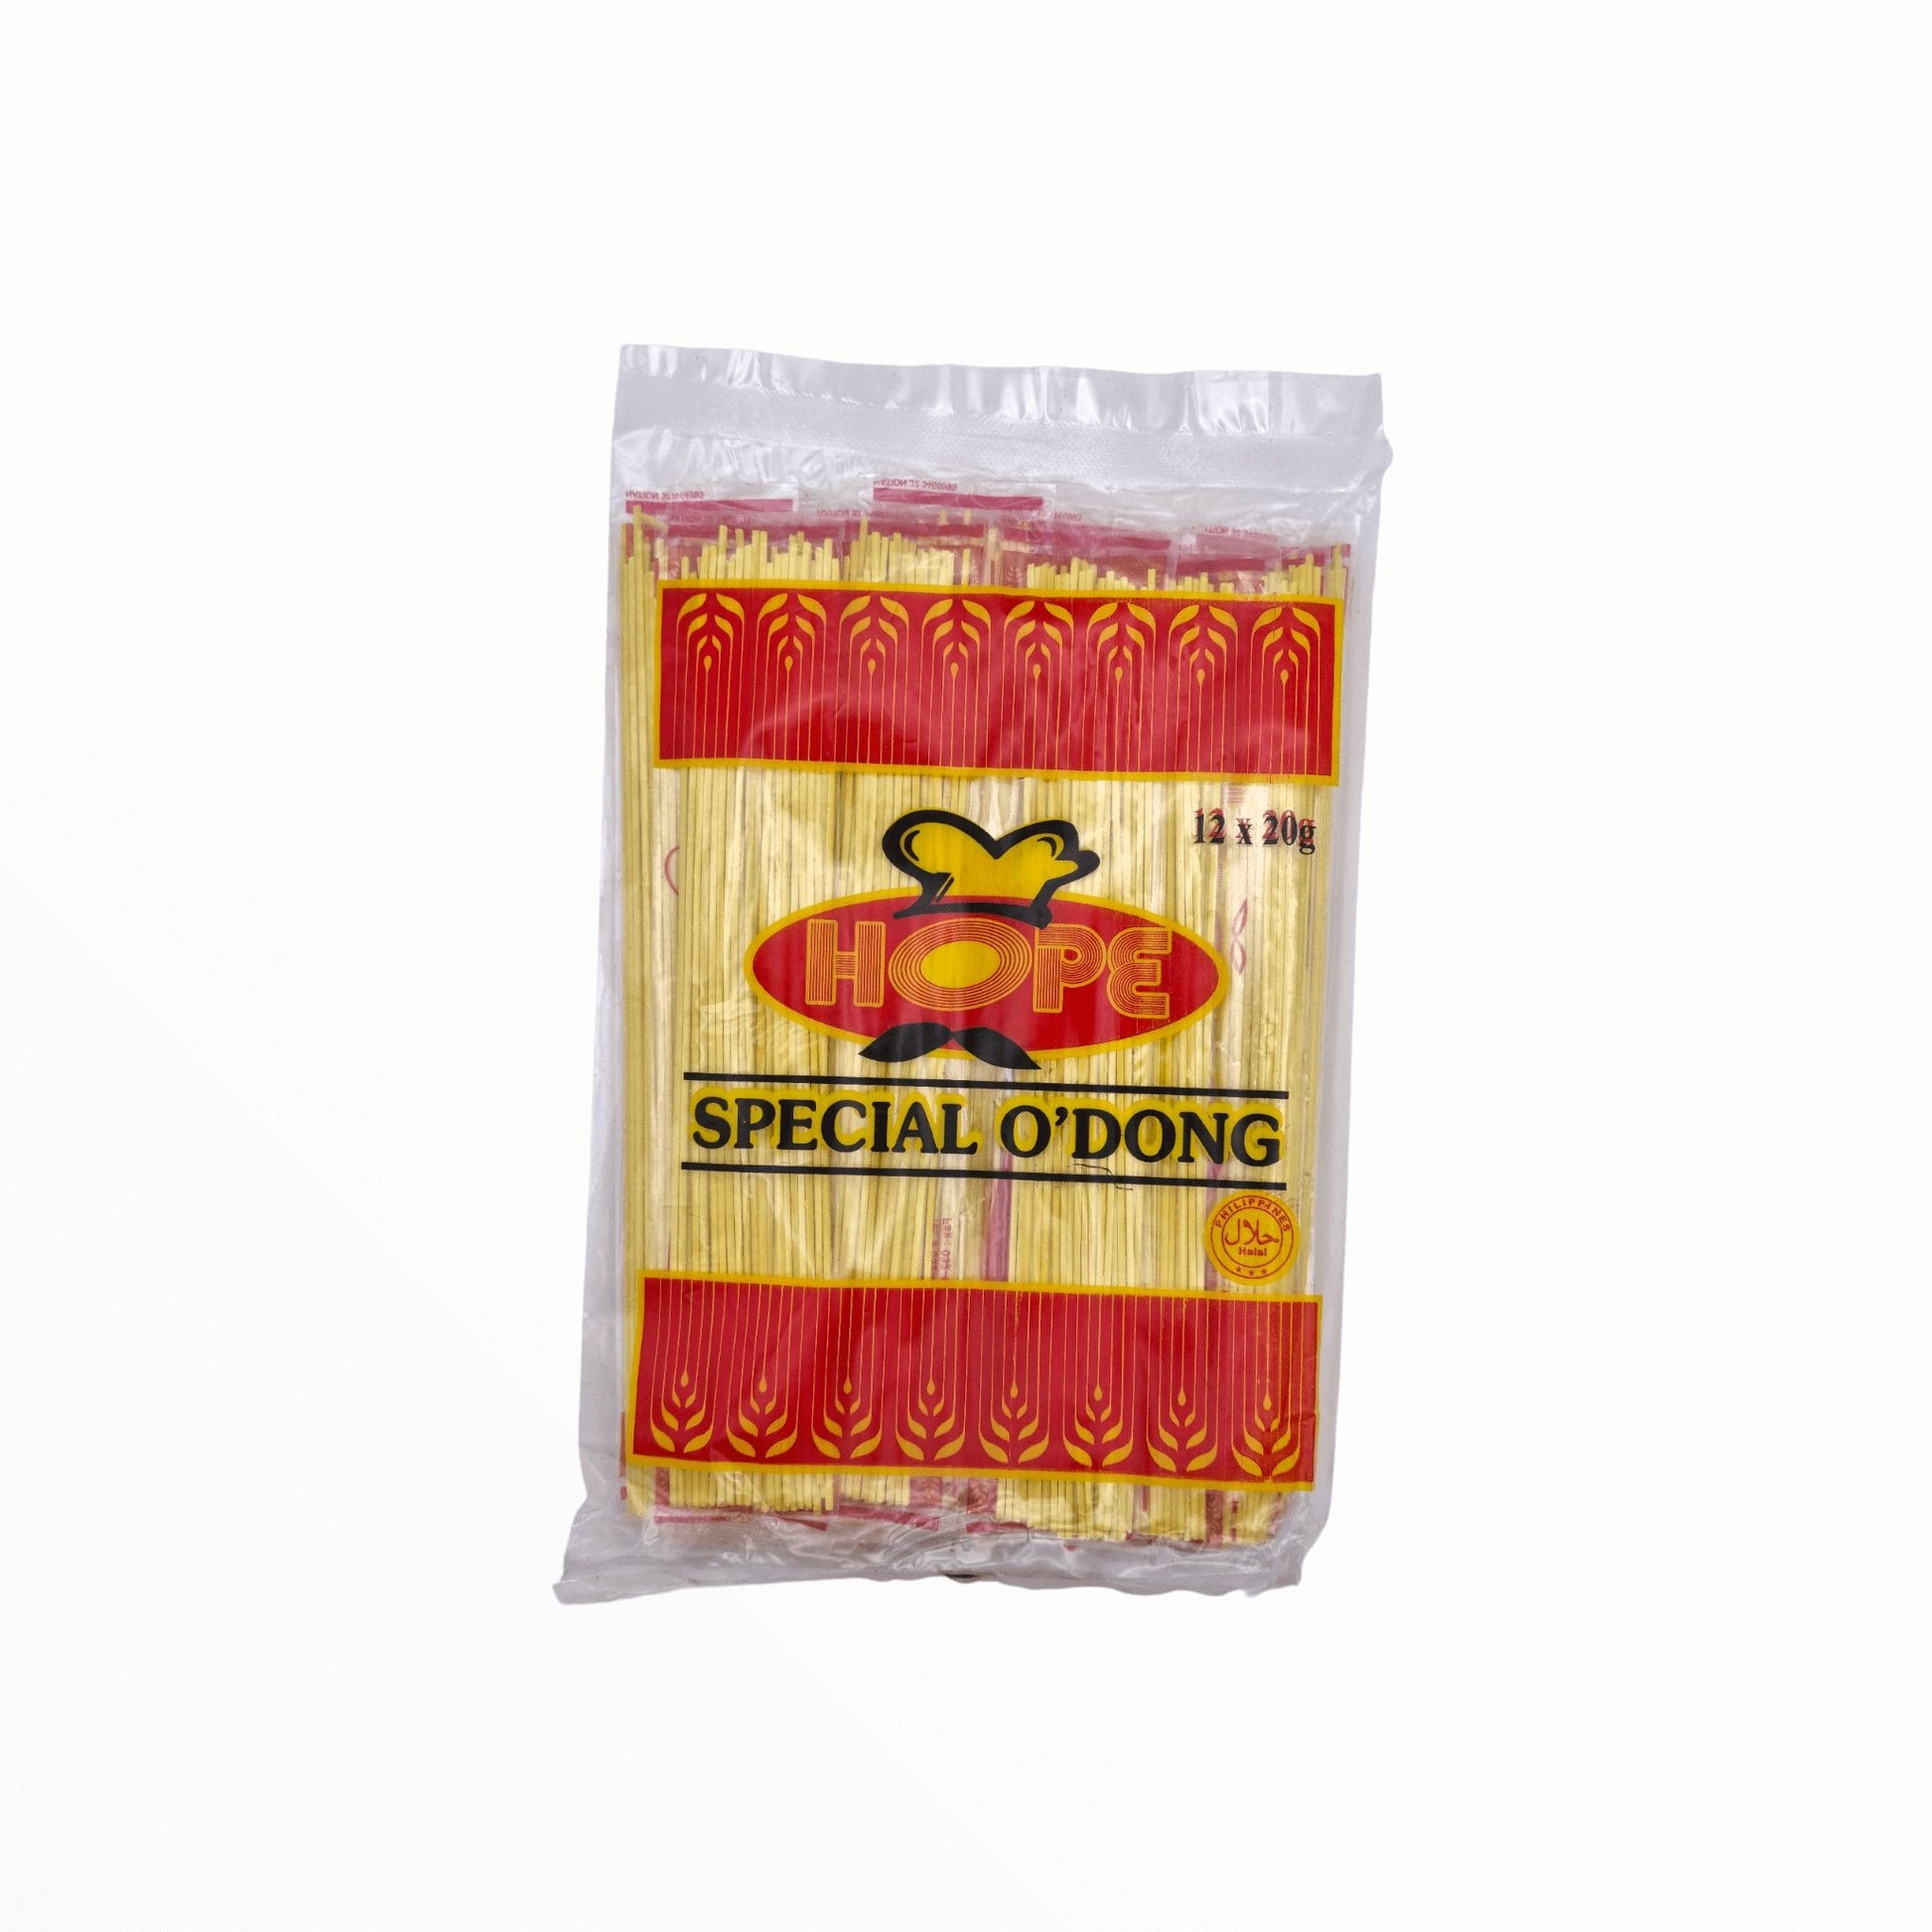 Hope Special Odong Noodles 12x20g - Mabuhay Pinoy Asia Shop